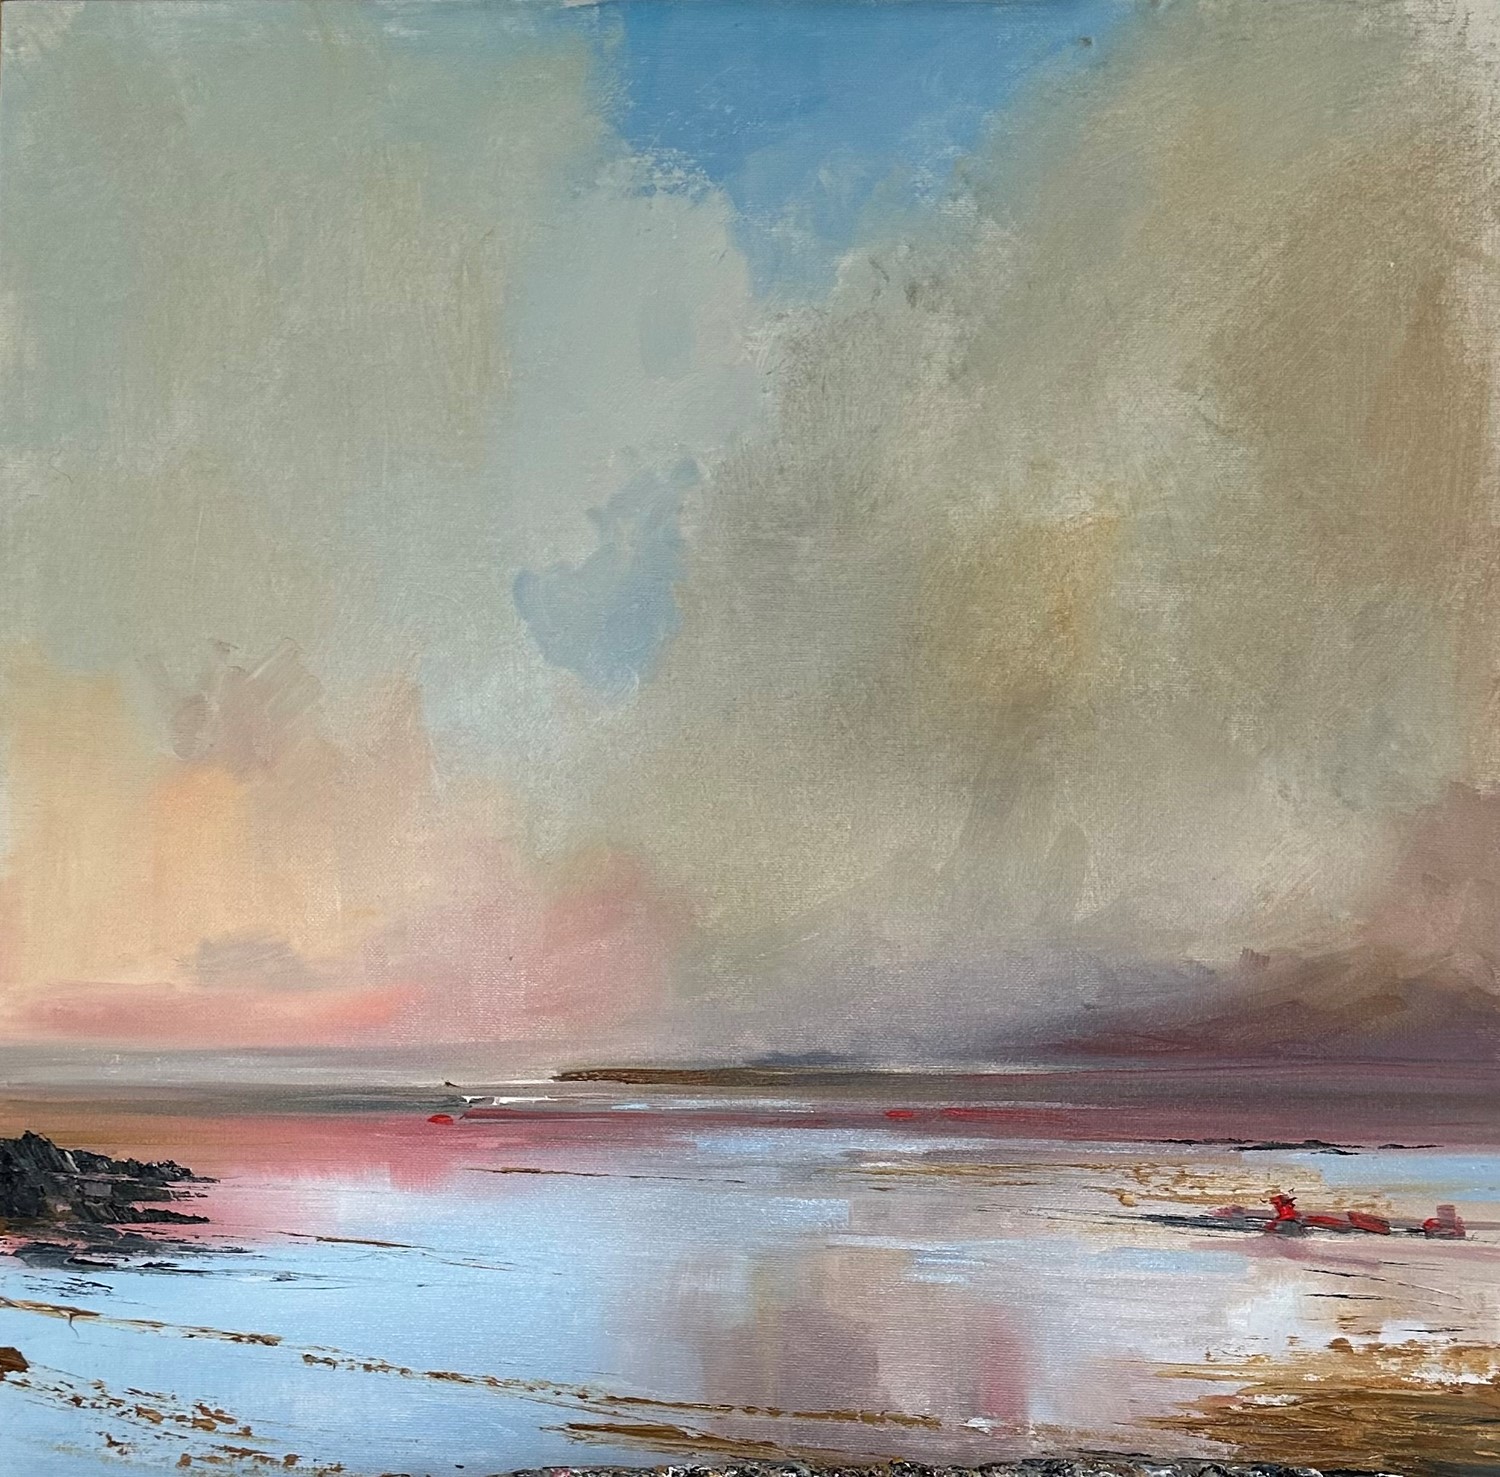 'As the clouds part ' by artist Rosanne Barr